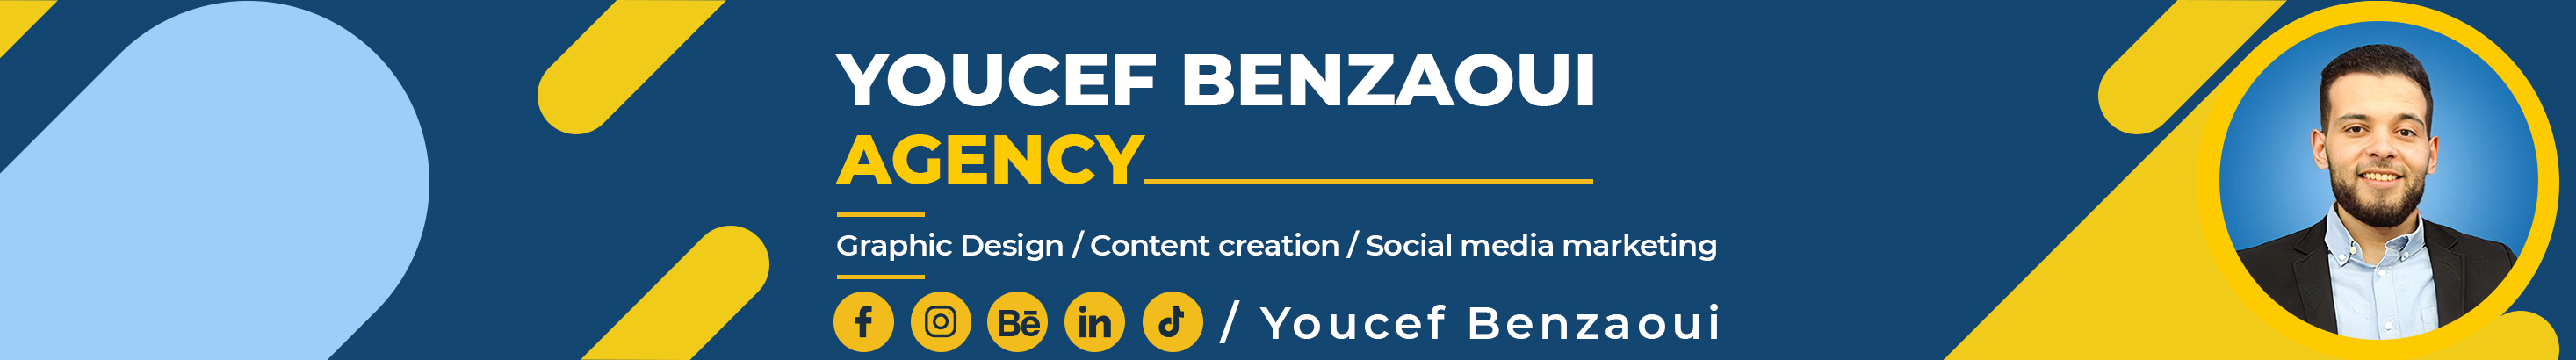 youcef benzaoui's profile banner